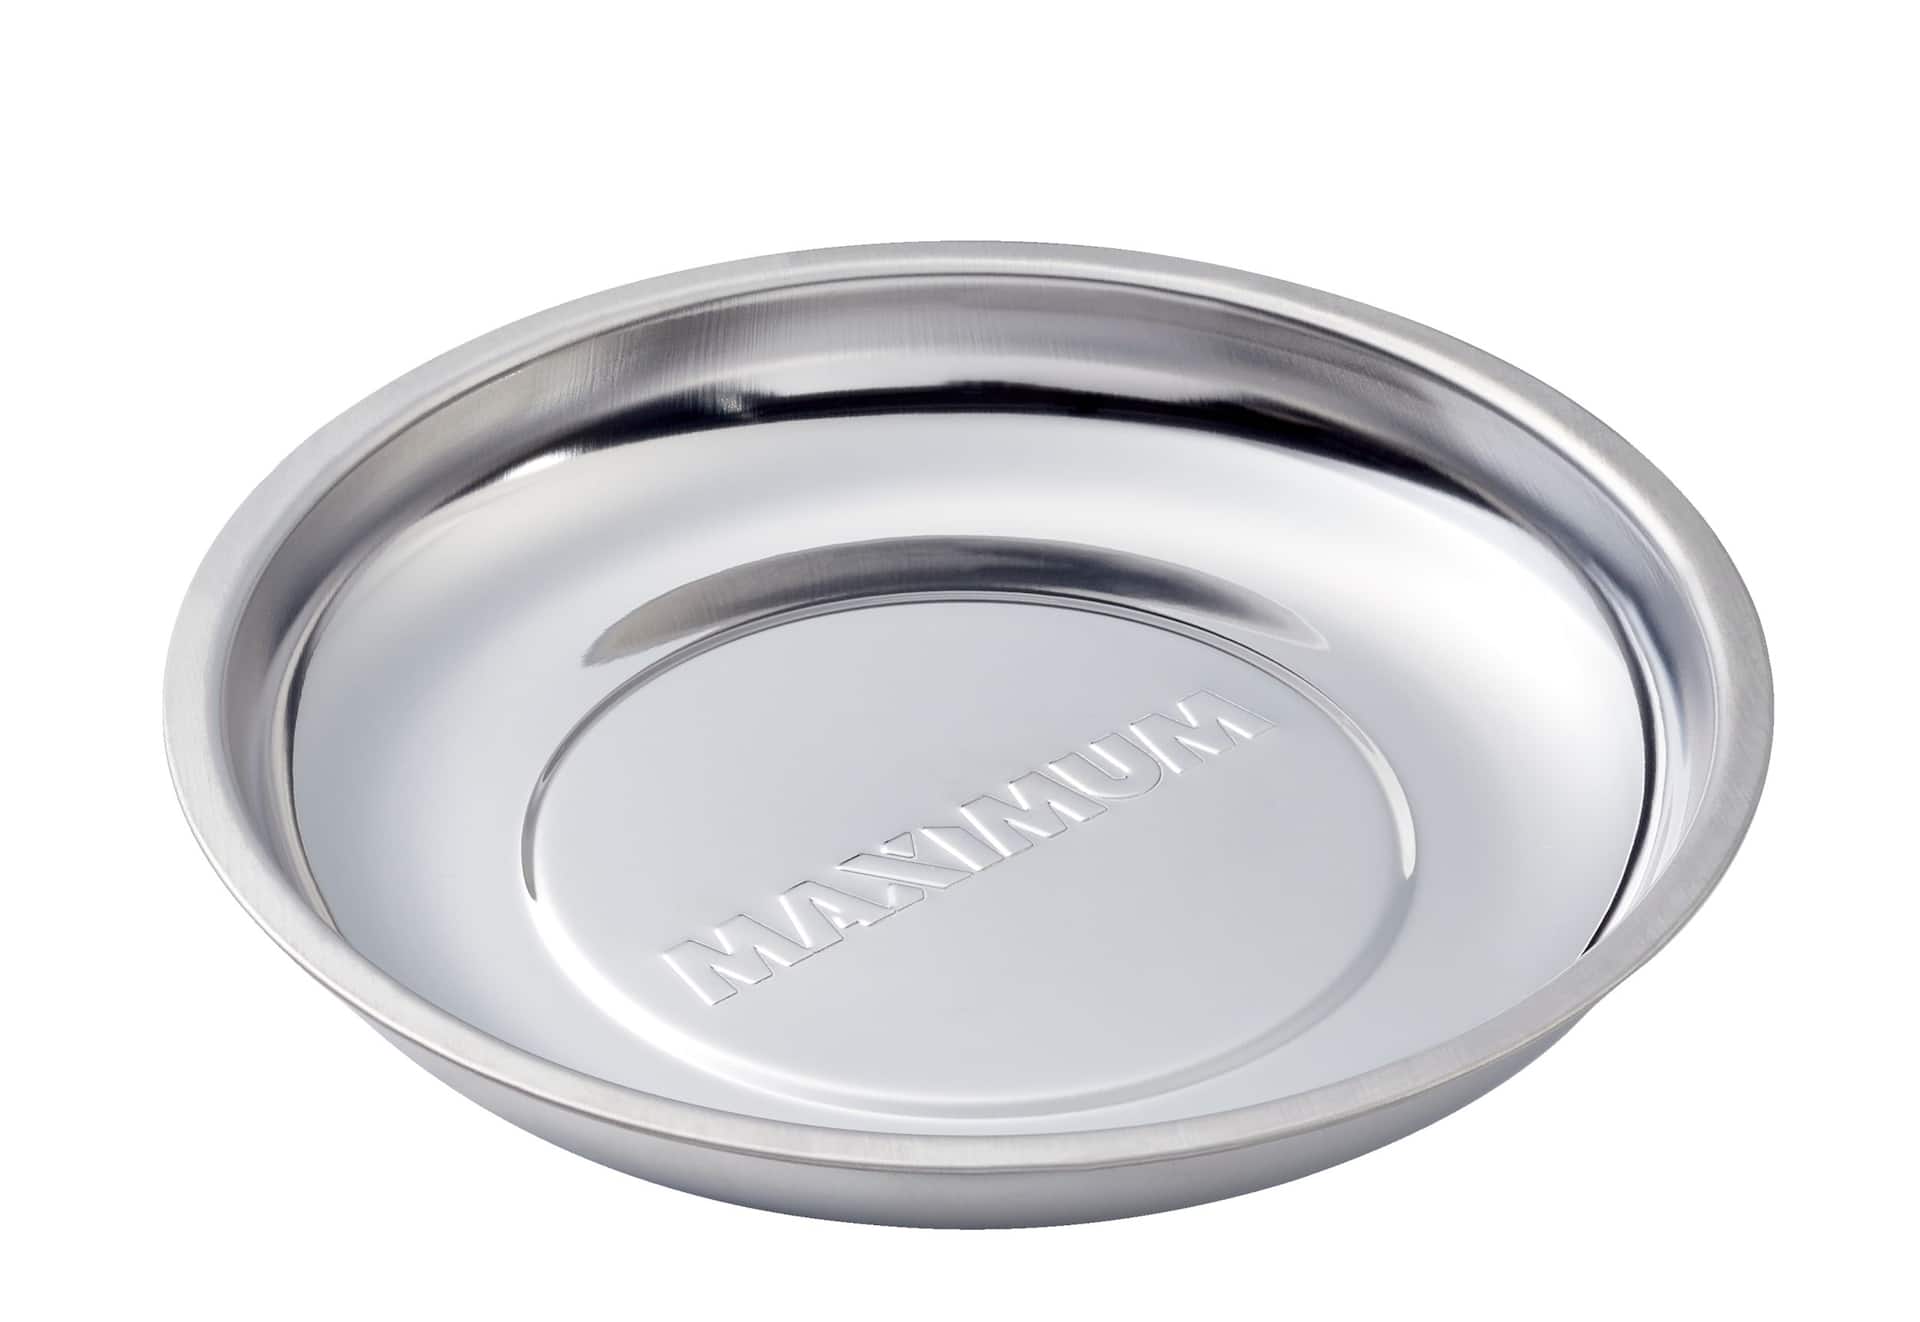 MAXIMUM Magnetic Tool Bowl Tray/Holder, Stainless Steel